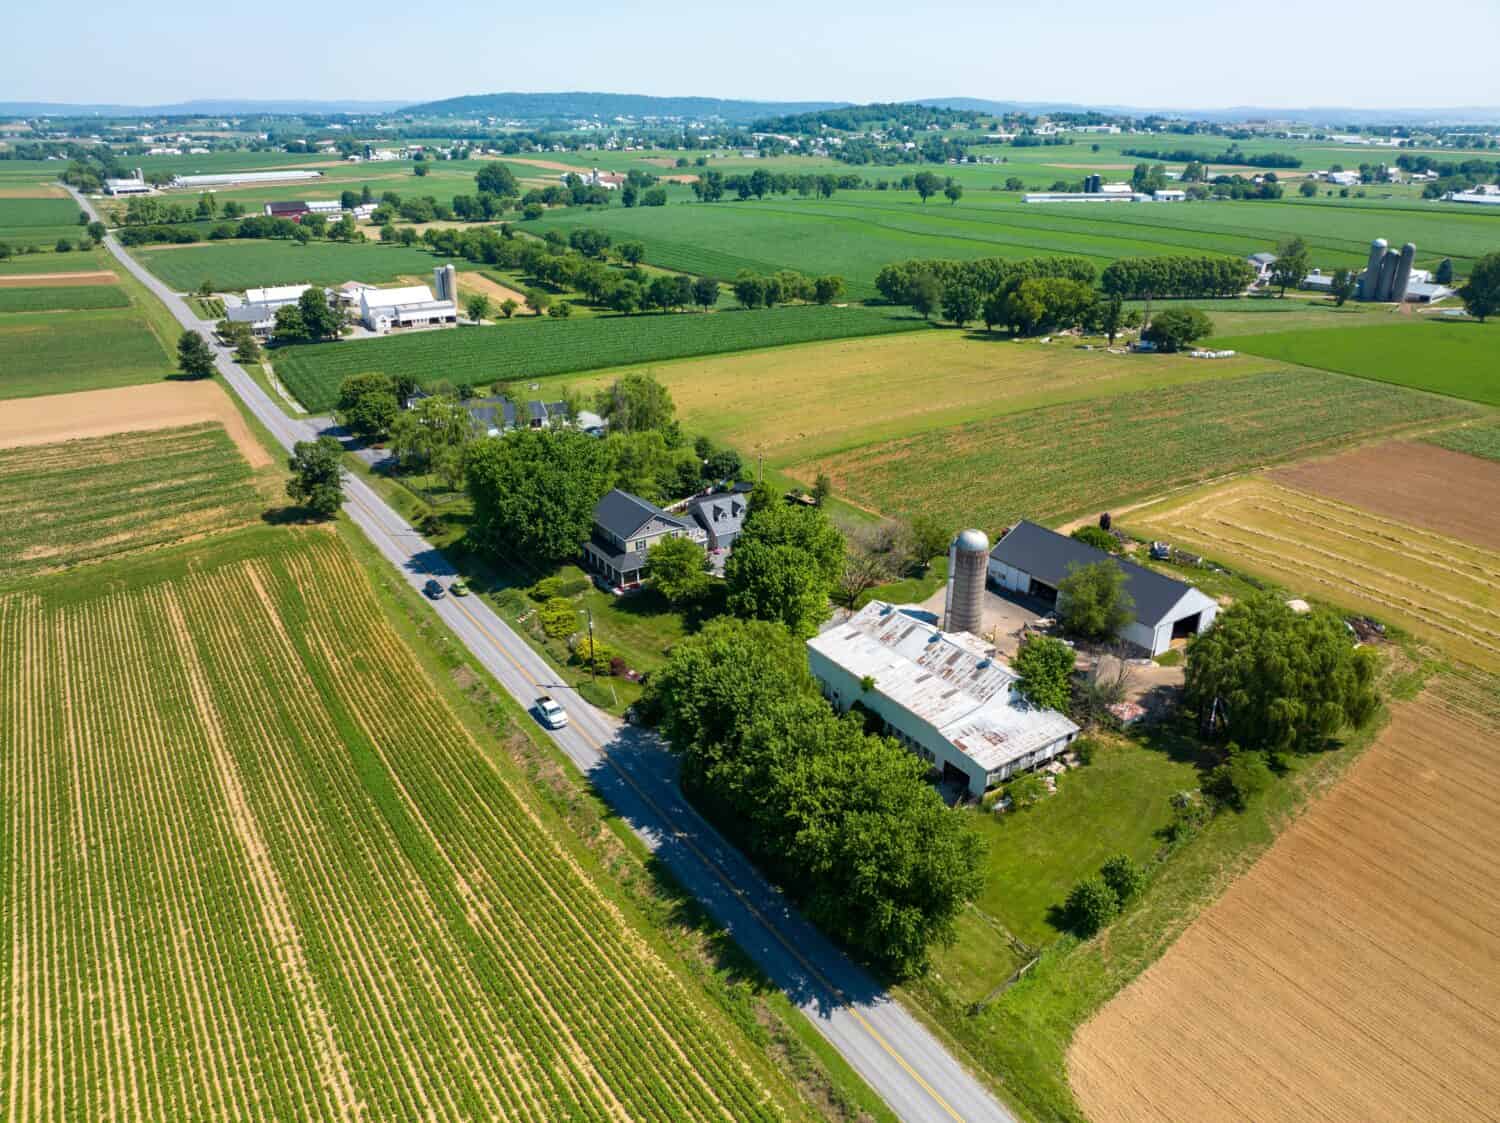 An aerial view of a farm surrounded by the lush green fields in Lancaster County, Pennsylvania.